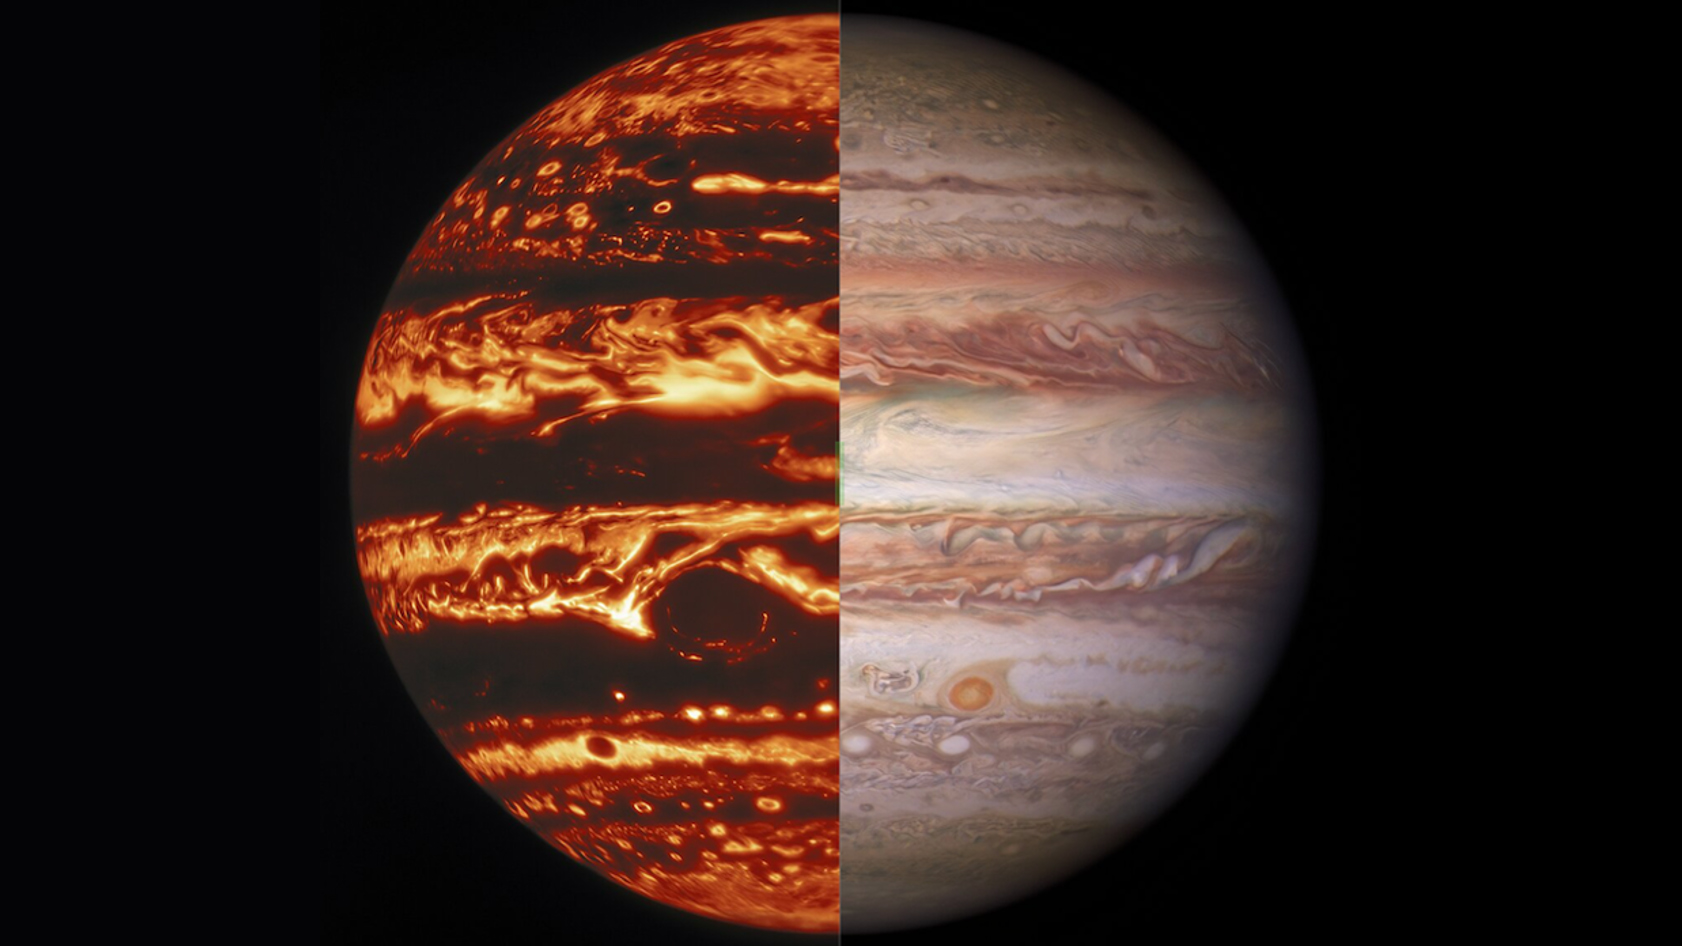 Græsse radium Dinkarville Jupiter's Great Red Spot is 40 times deeper than Mariana Trench | Live  Science